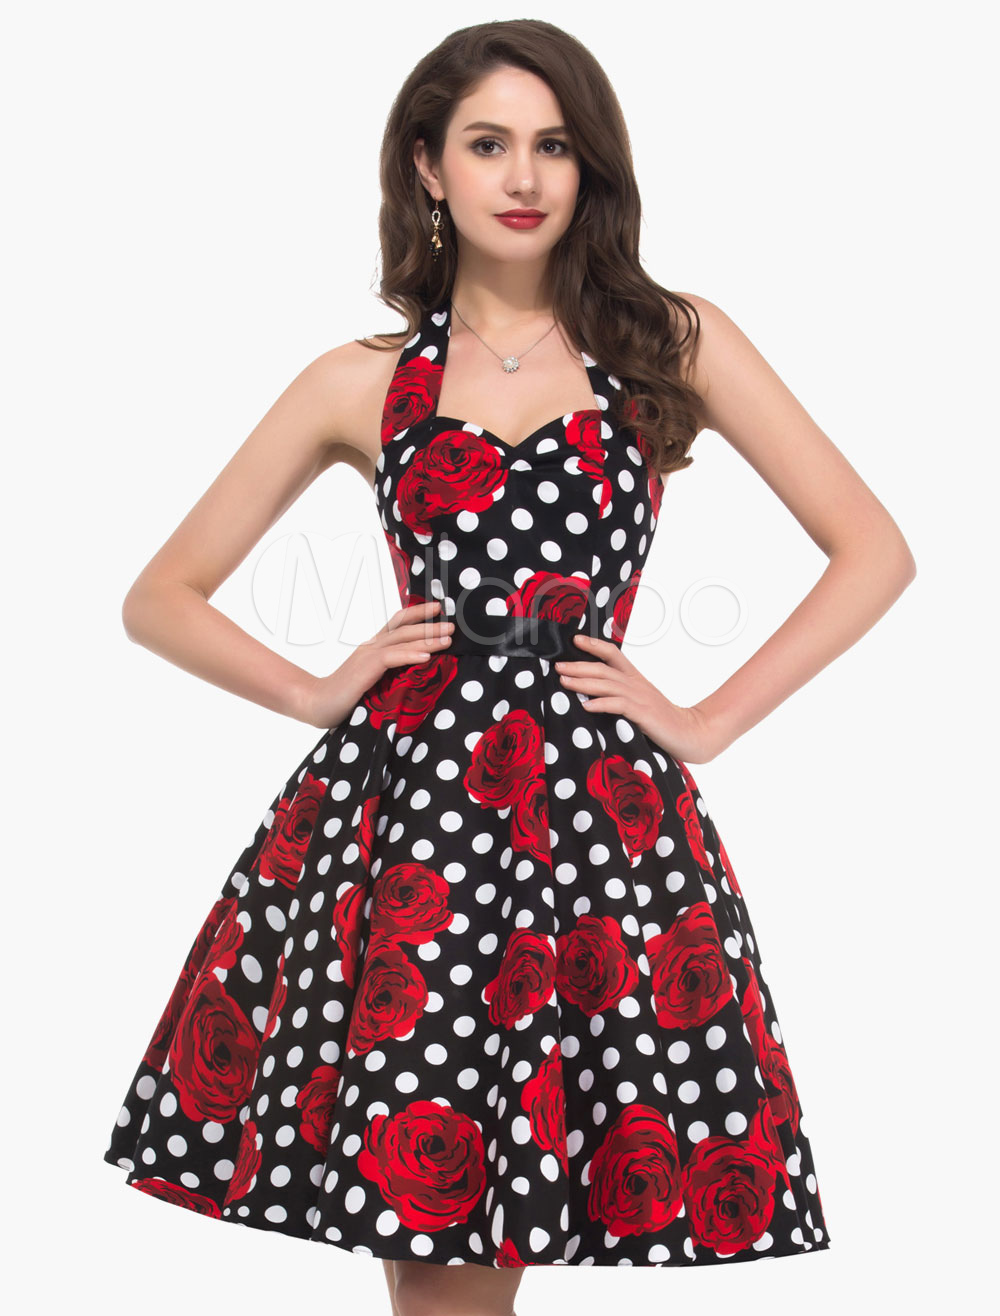 Sexy Retro Rockabilly Dance Dress With Rose and Polka Dot Print ...